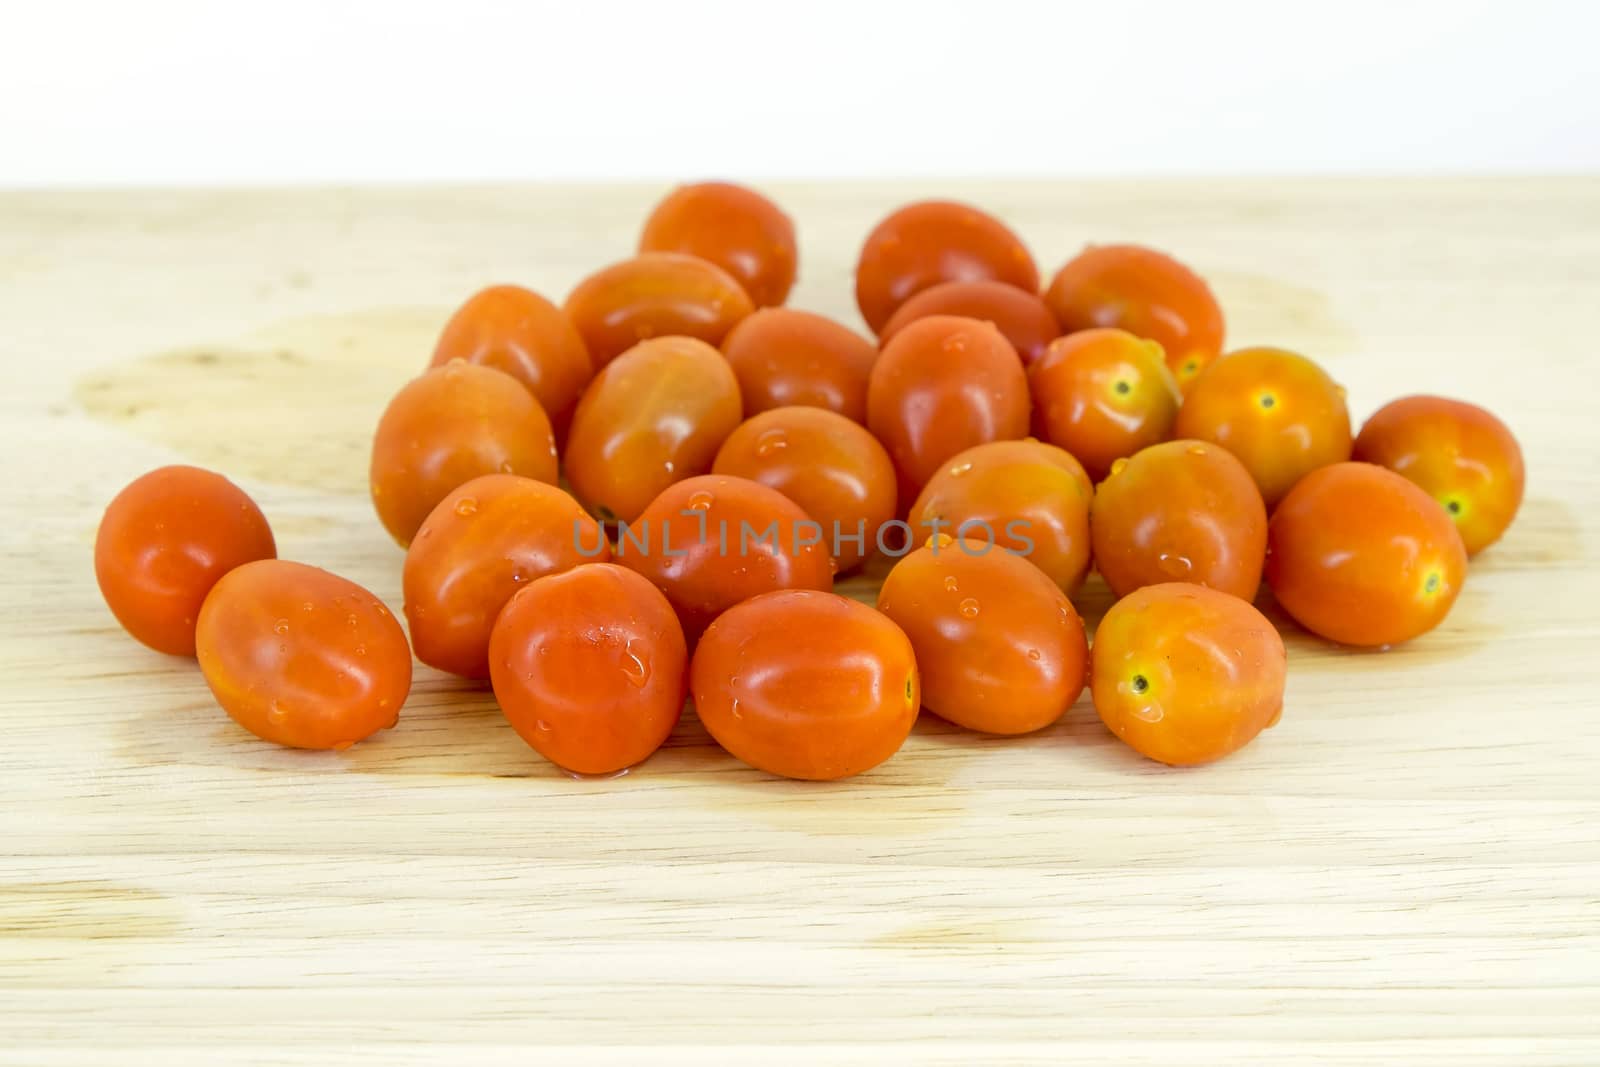 Cherry tomatoes on cutting board by art9858